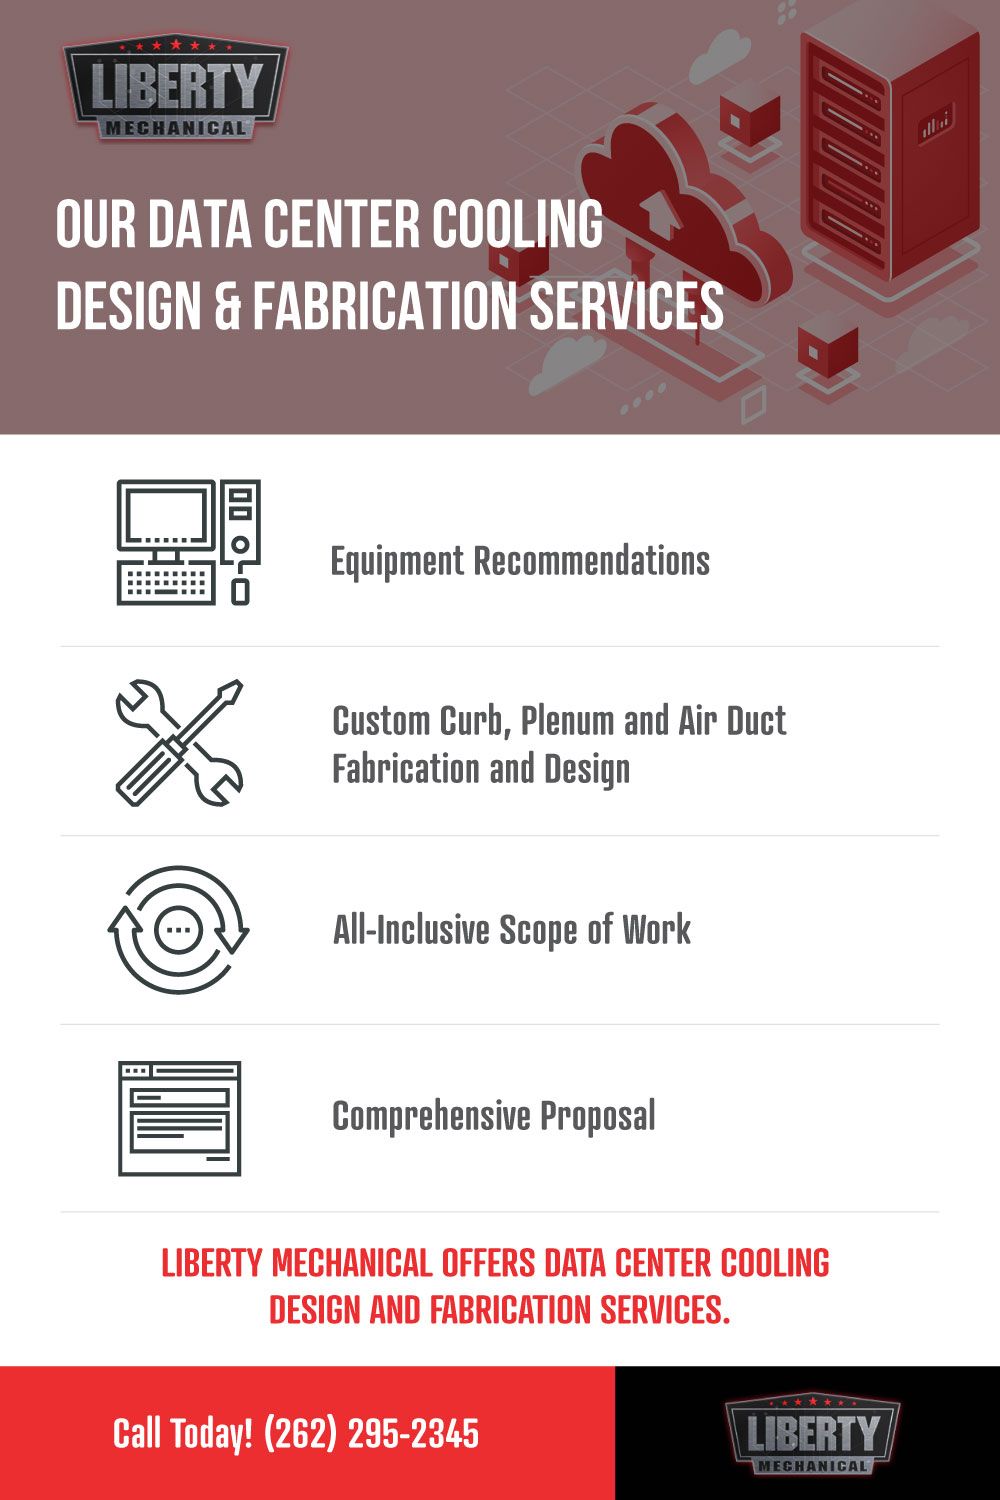 Our-Data-Center-Cooling-Design-&-Fabrication-Services.jpg